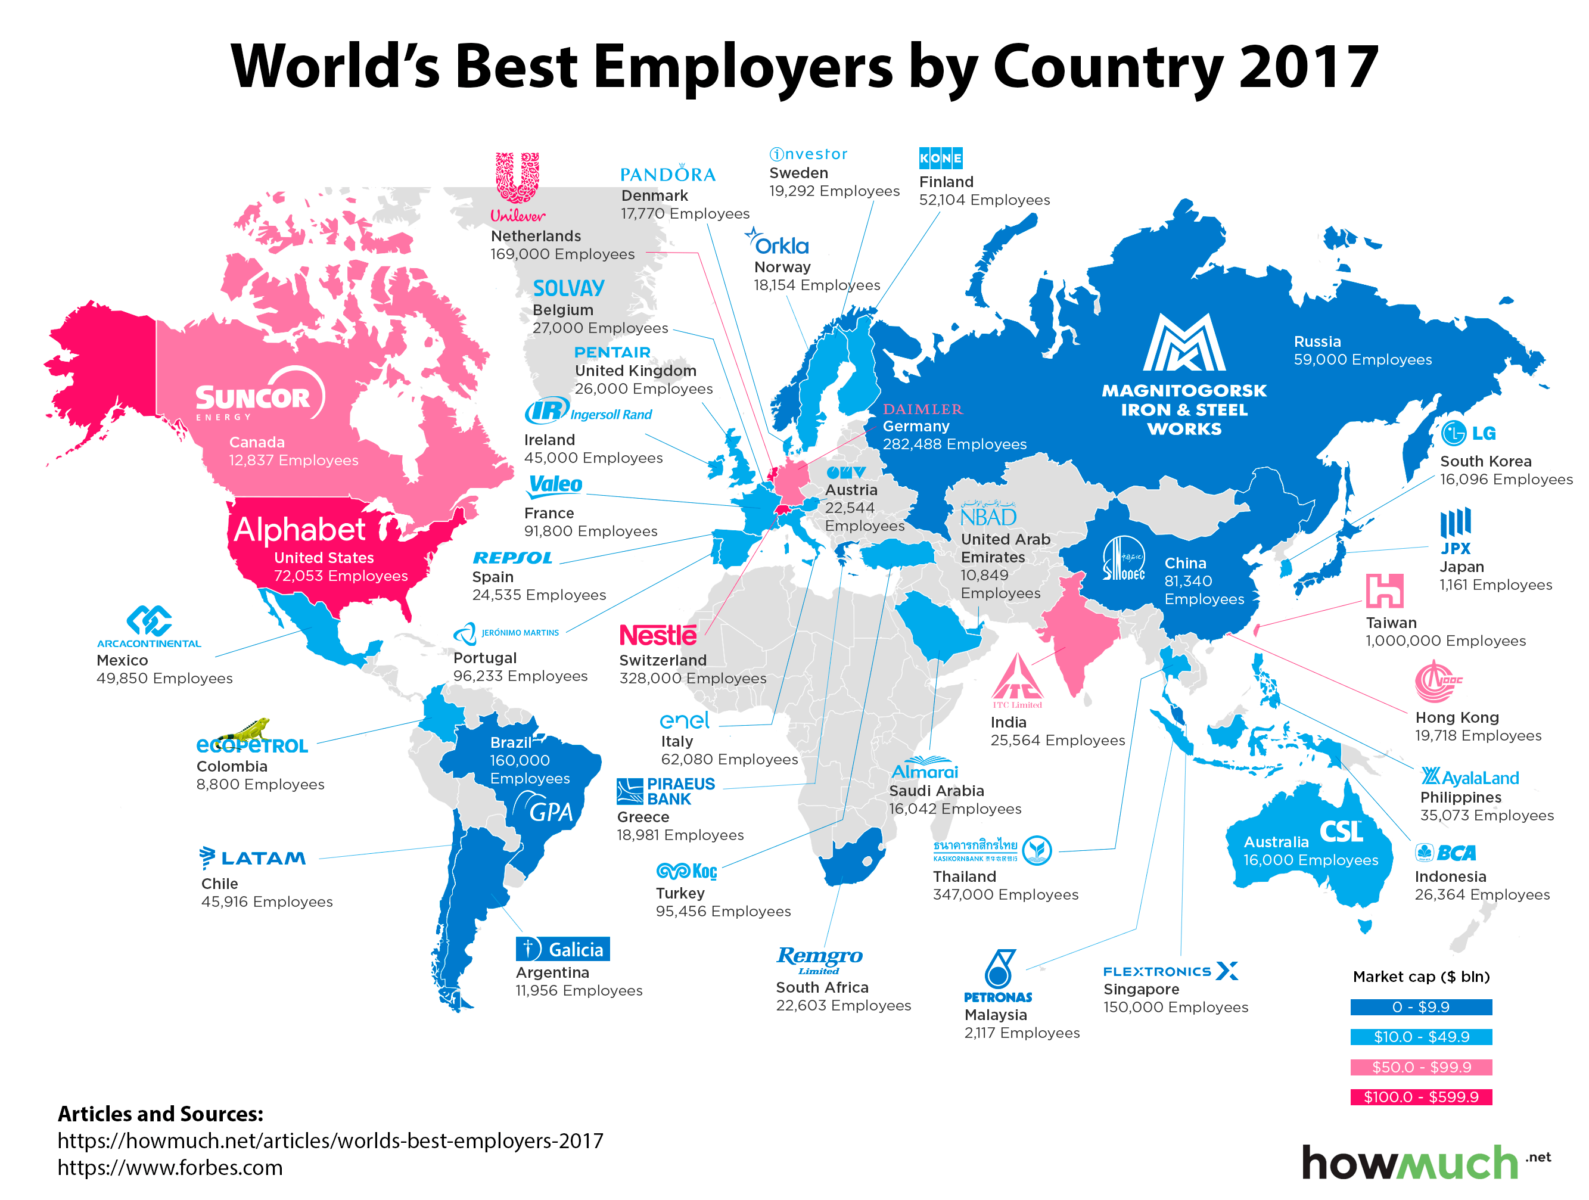 What’s the best company to work for in your country? - The Big Picture